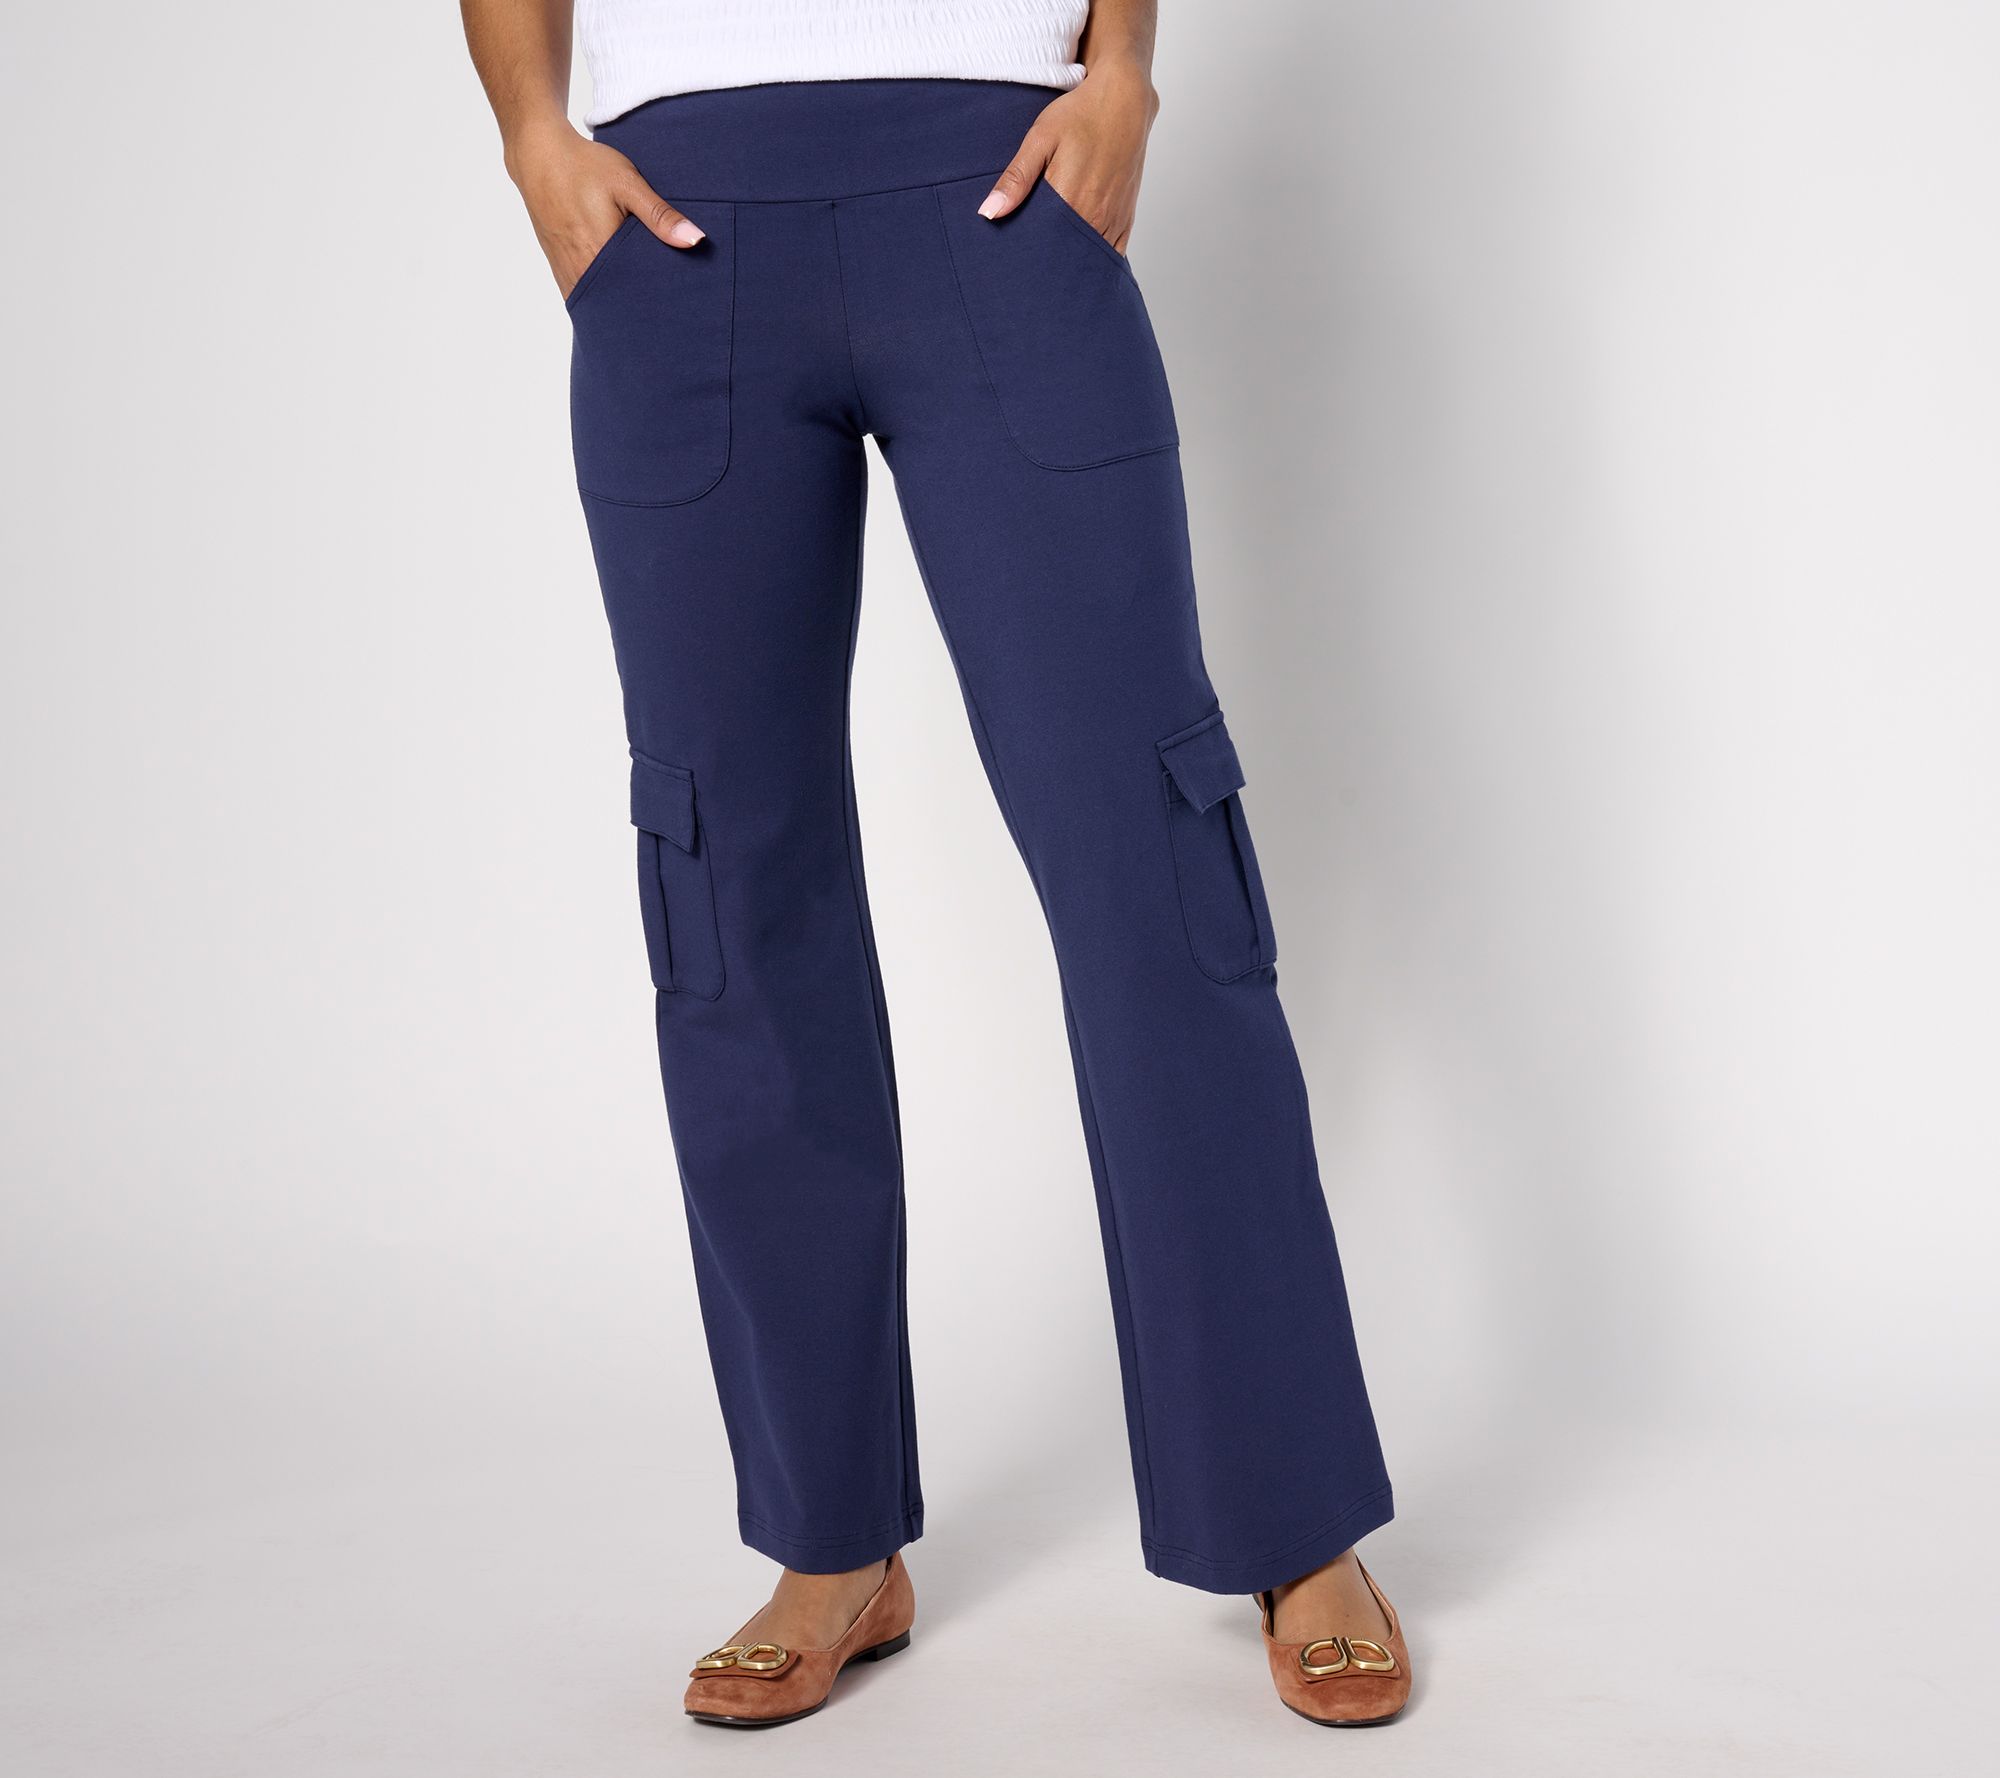 Women with Control - Blue - Pants 